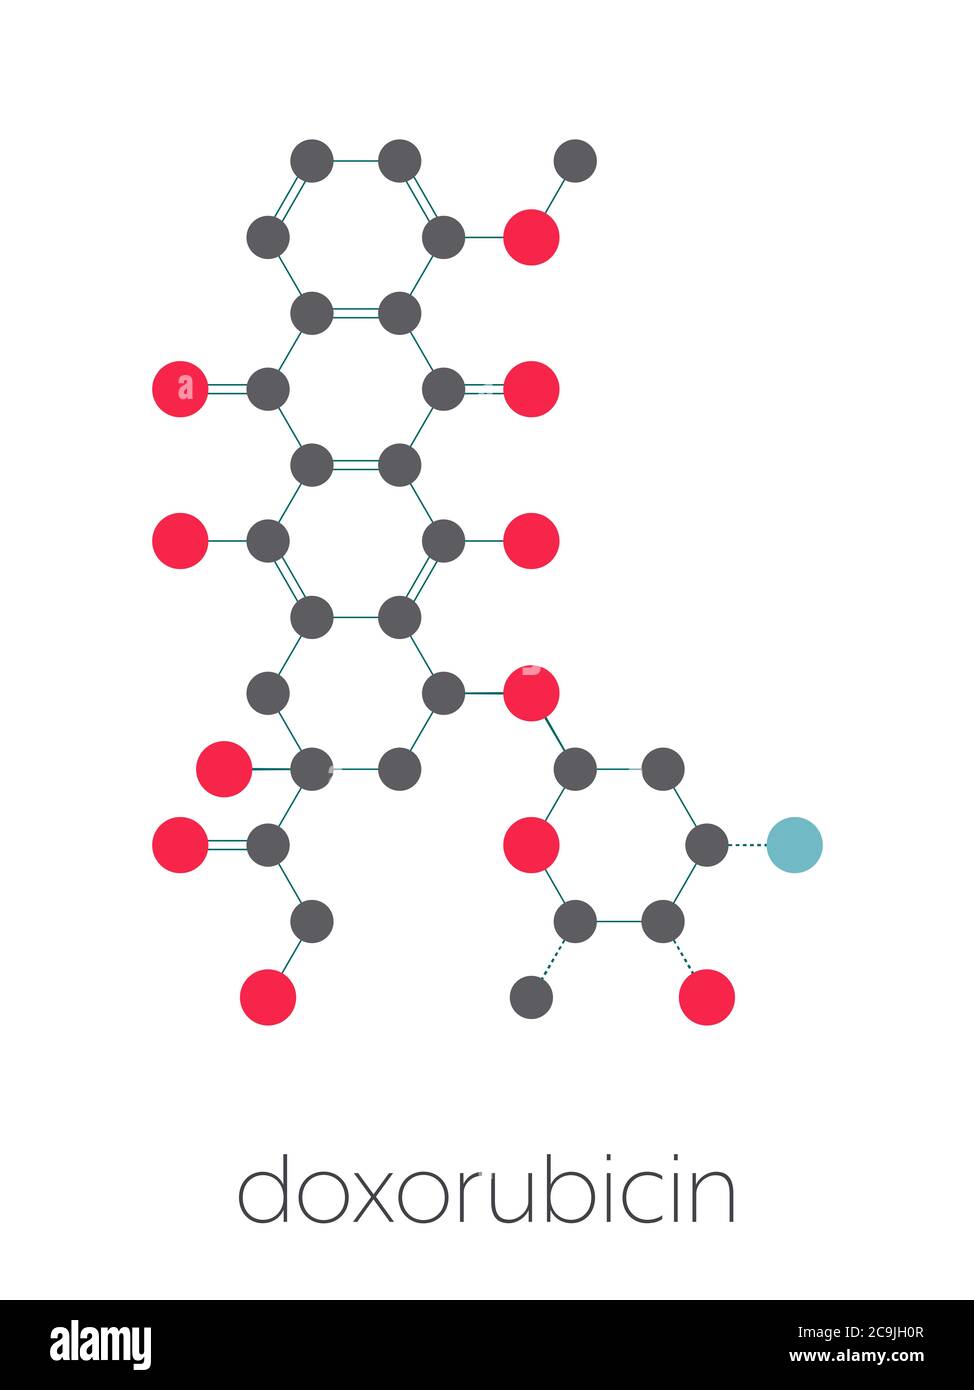 Doxorubicin cancer chemotherapy drug molecule. Stylized skeletal formula (chemical structure). Atoms are shown as color-coded circles connected by thi Stock Photo